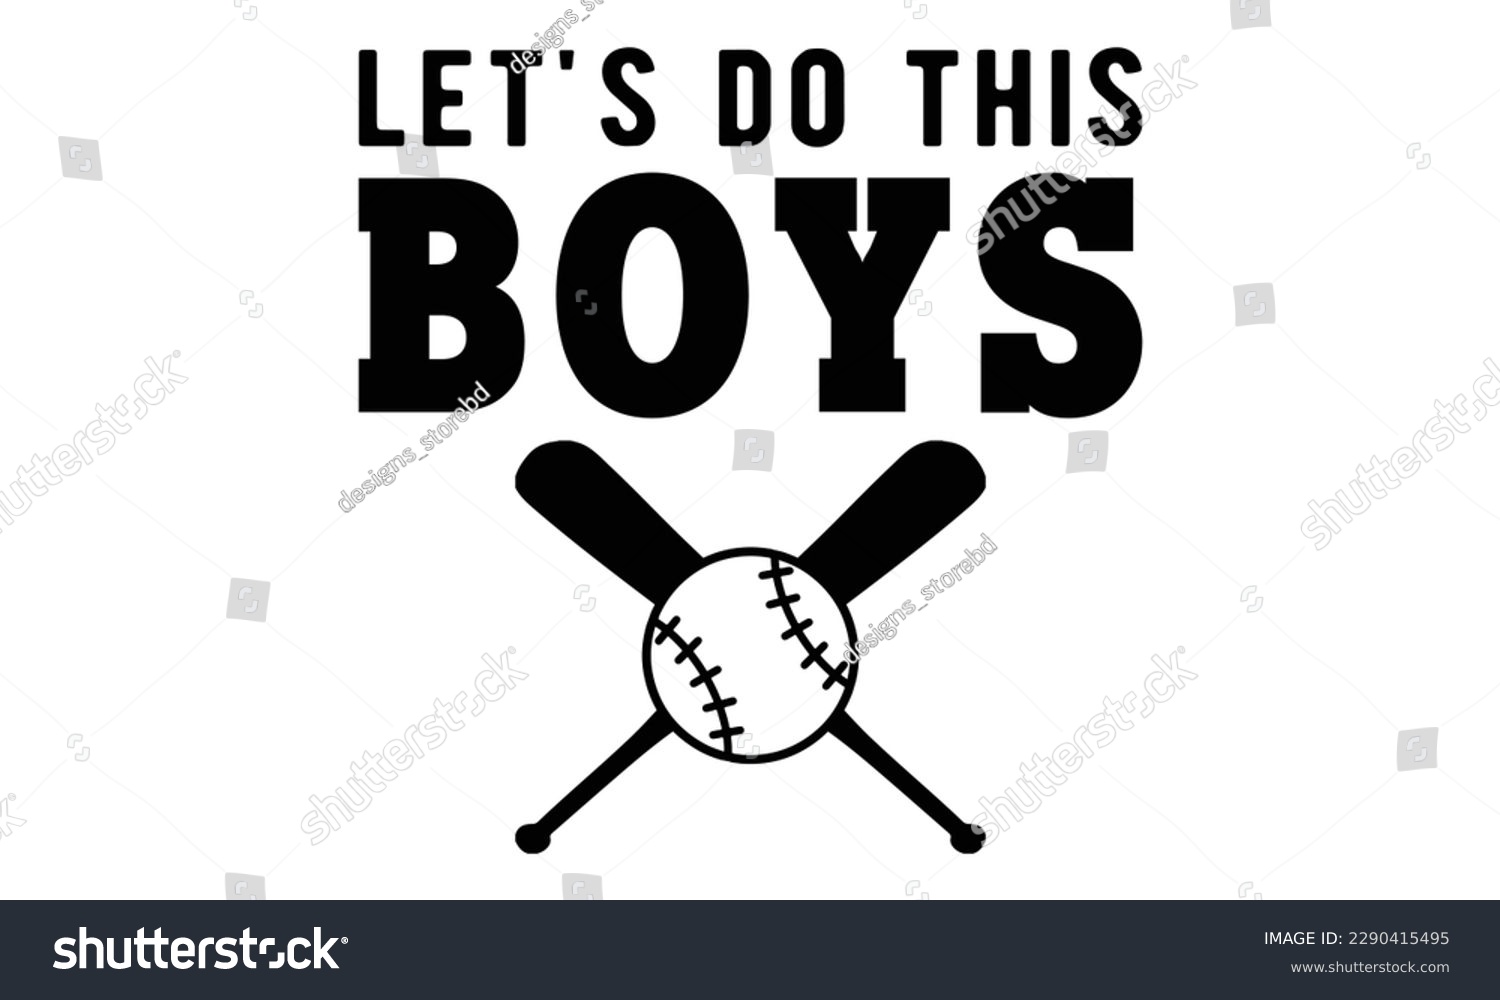 SVG of Let's do this boys svg, baseball svg, Baseball Mom SVG Design, softball, softball mom life, Baseball svg bundle, Files for Cutting Typography Circuit and Silhouette, Baseball Mom Life svg